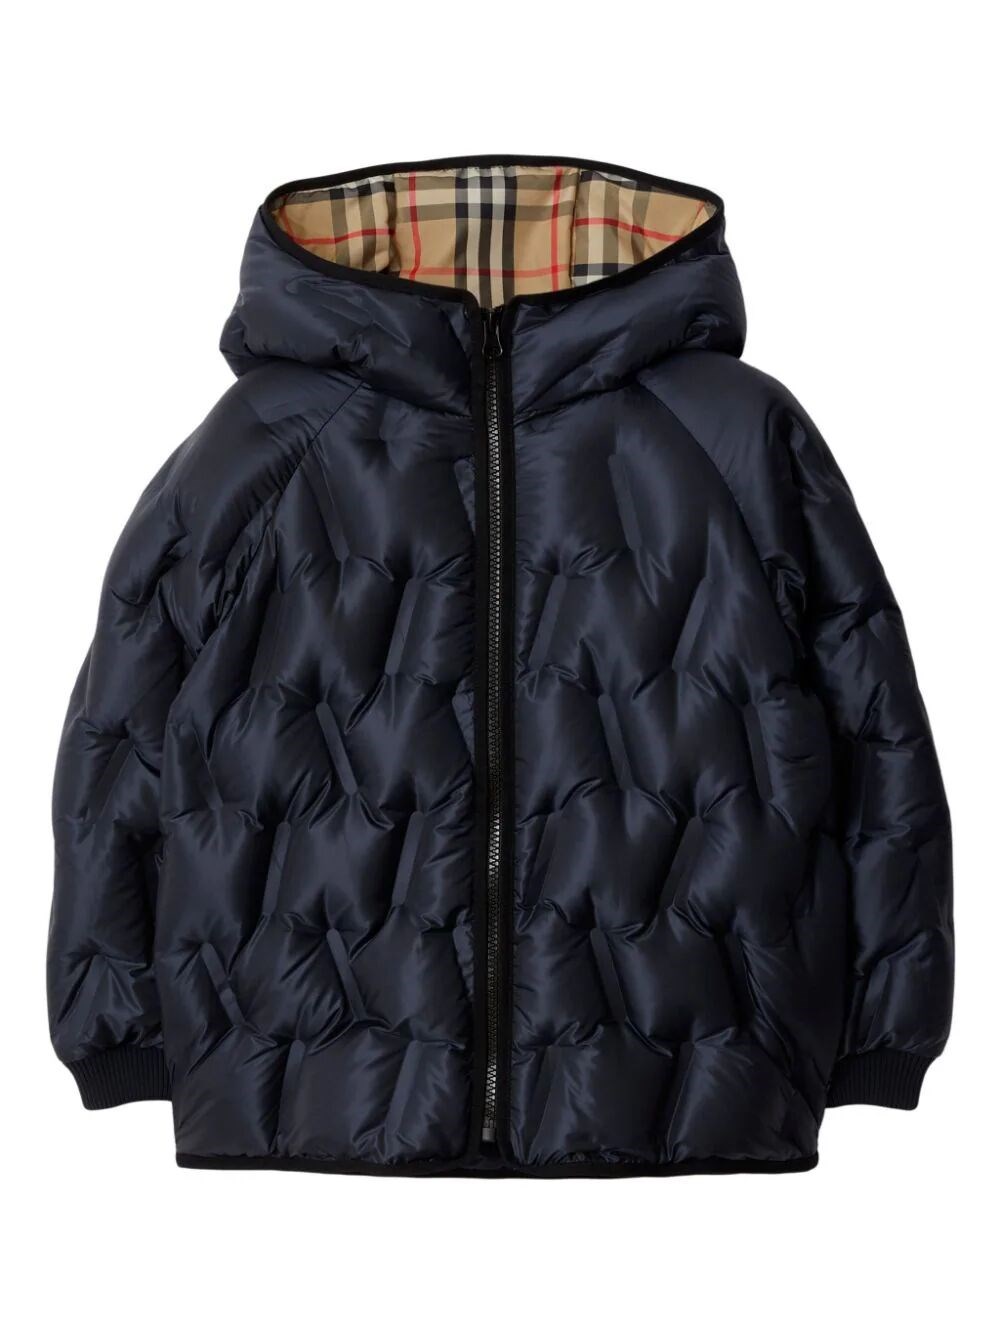 BURBERRY BONDED PUFFER JACKET